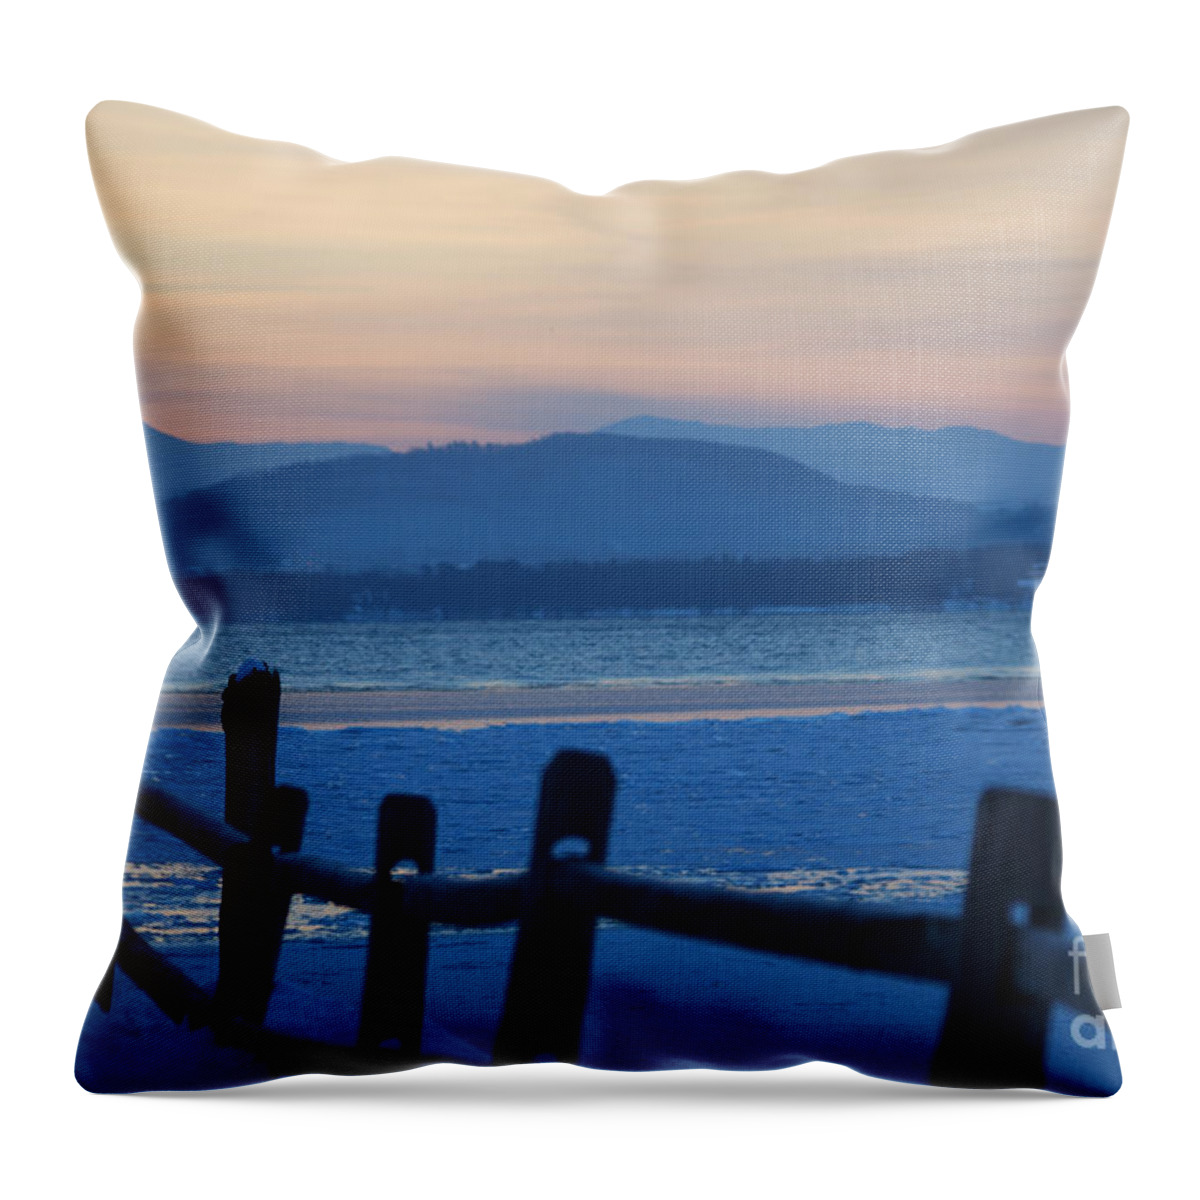 Fence Throw Pillow featuring the photograph Wooden fence by Dejan Jovanovic